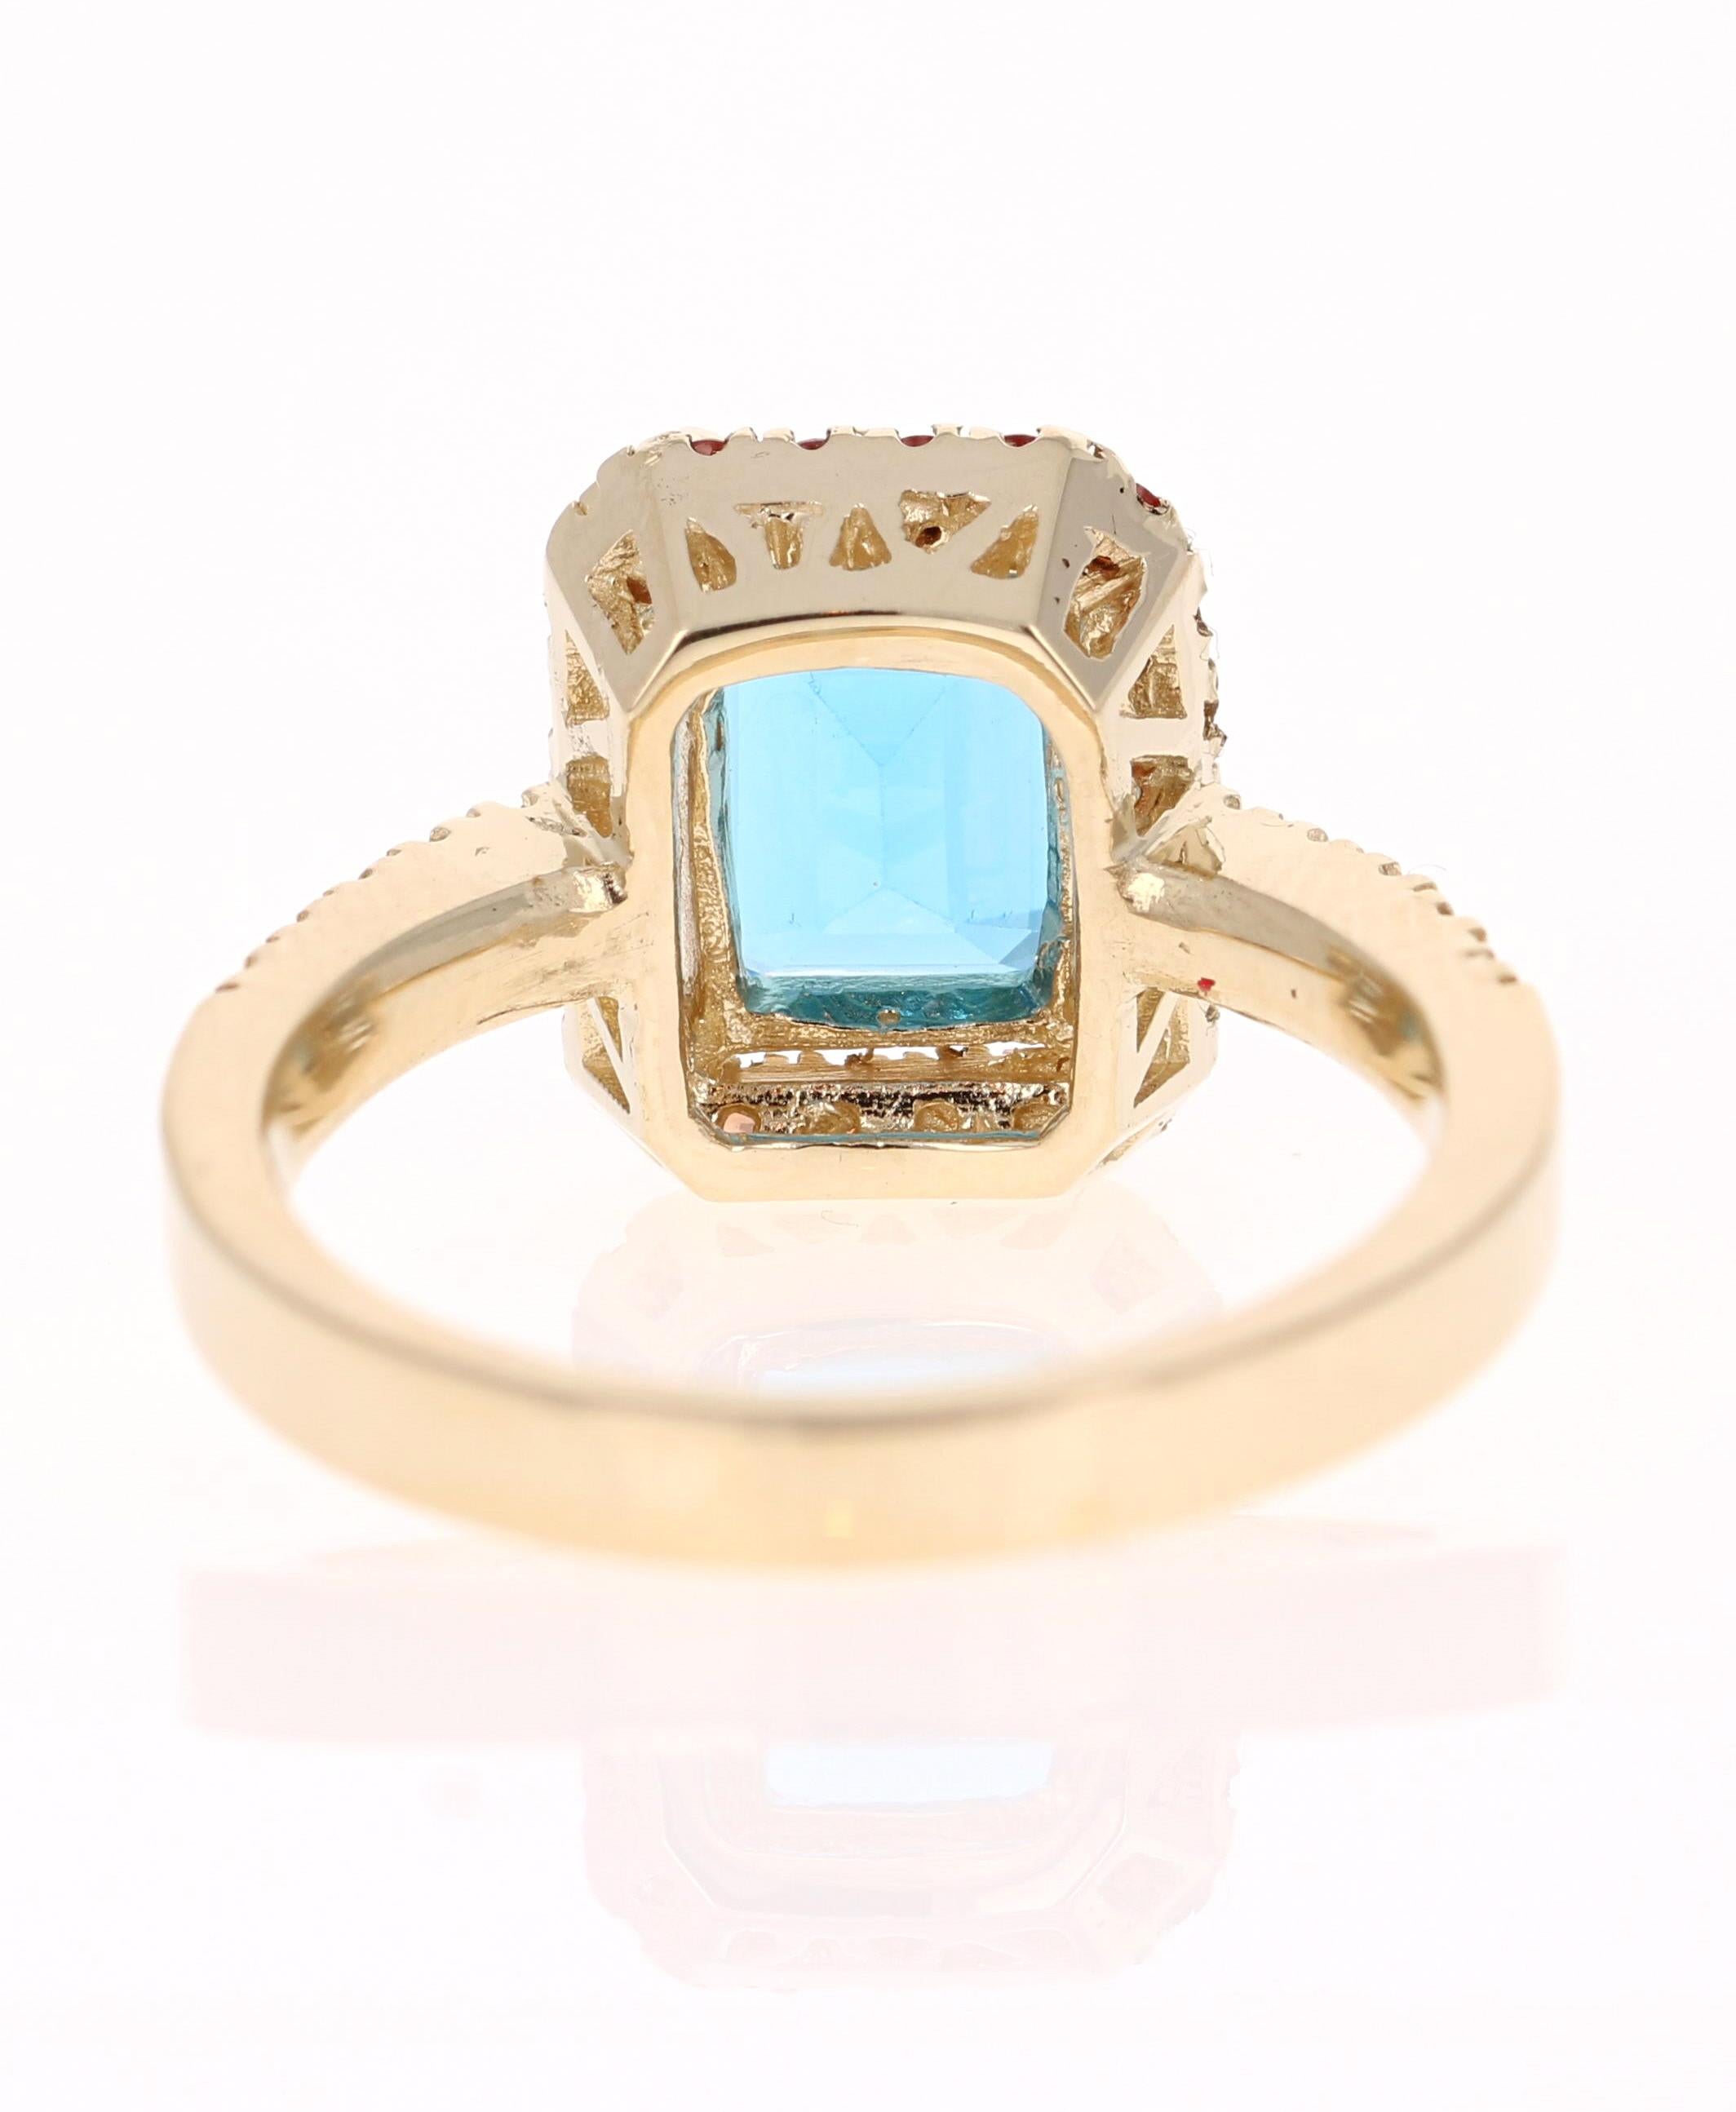 3.41 Carat Blue Topaz Sapphire Diamond Yellow Gold Engagement Ring In New Condition For Sale In Los Angeles, CA